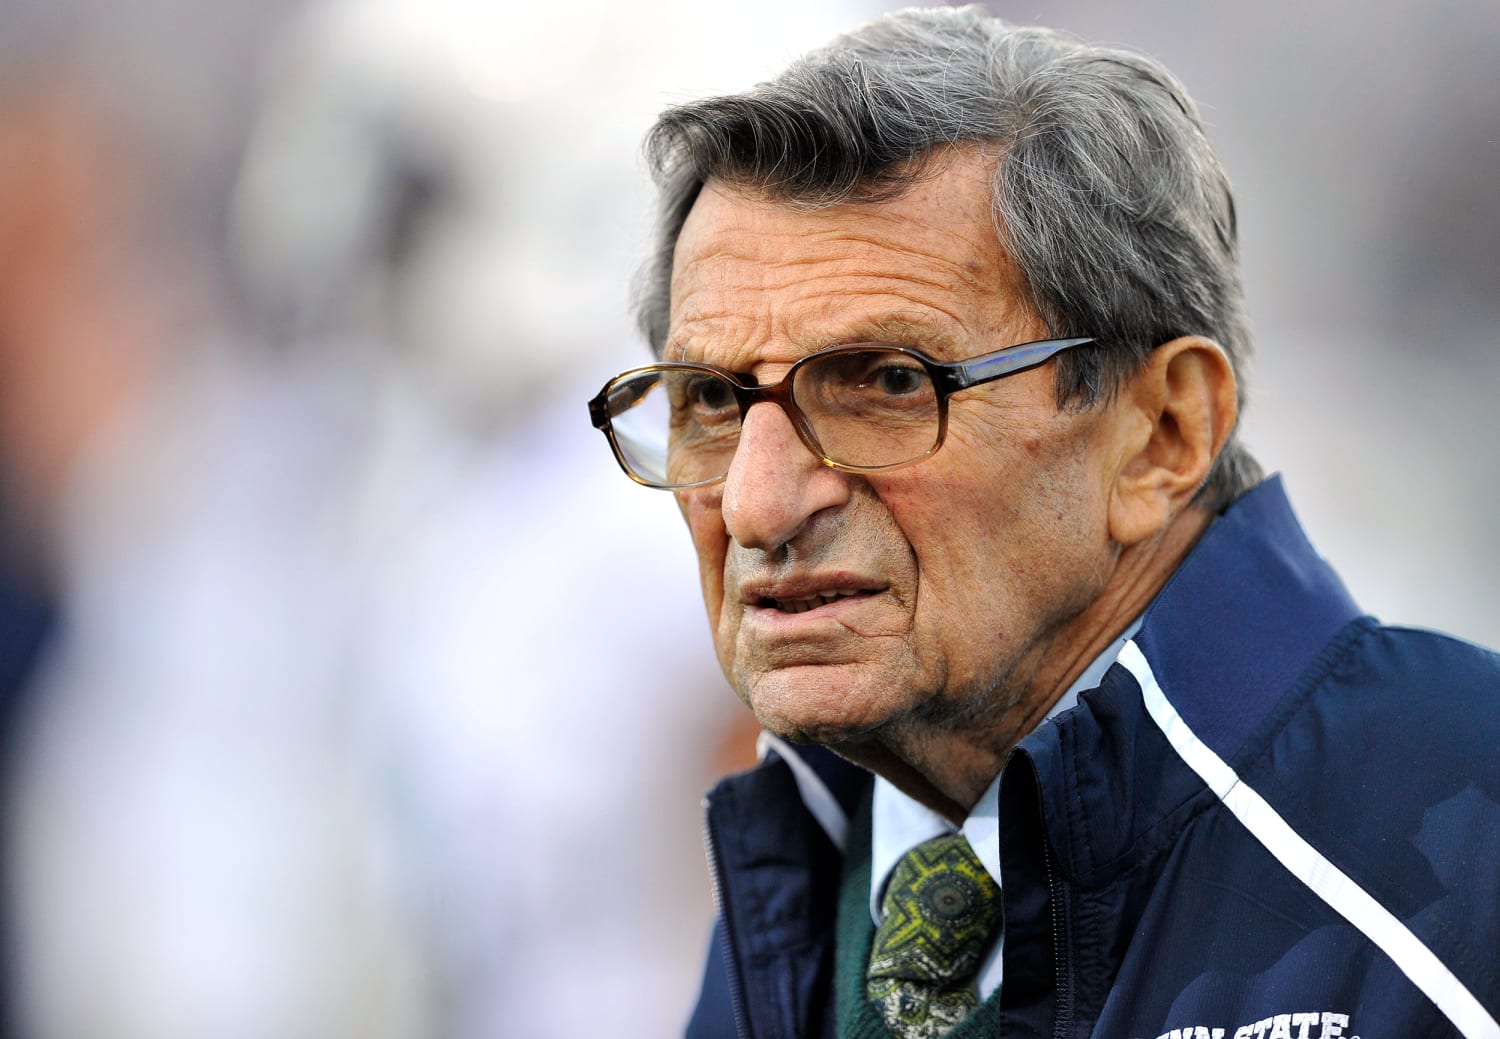 Penn State to Honor Coach Joe Paterno Five Years After His Firing